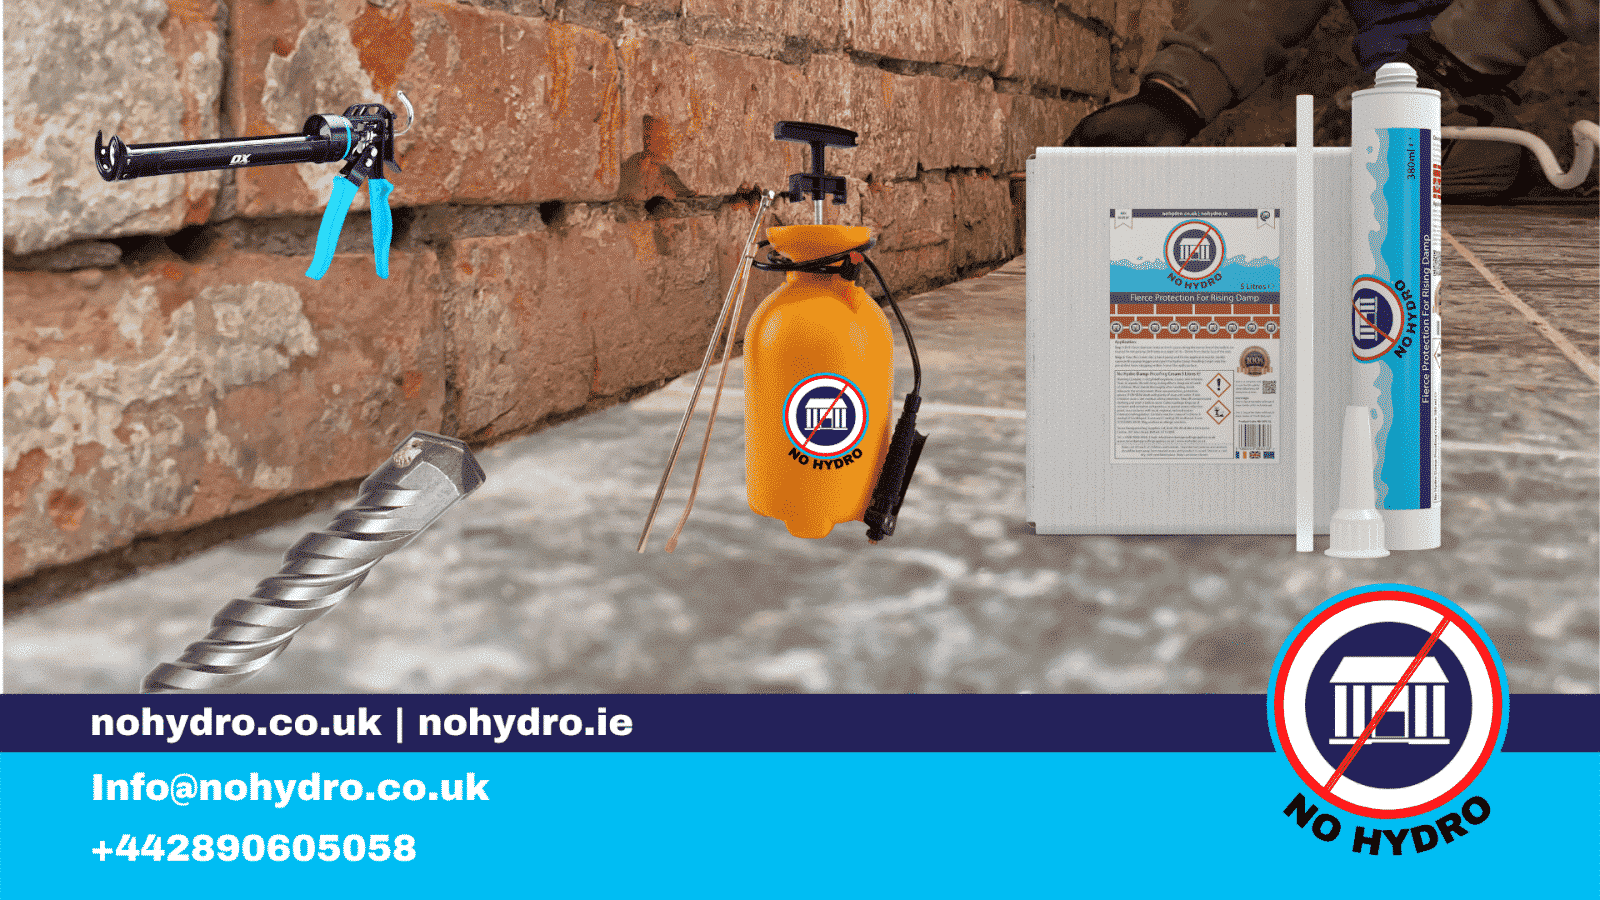 What equipment is required to apply No Hydro Damp Proofing Cream?